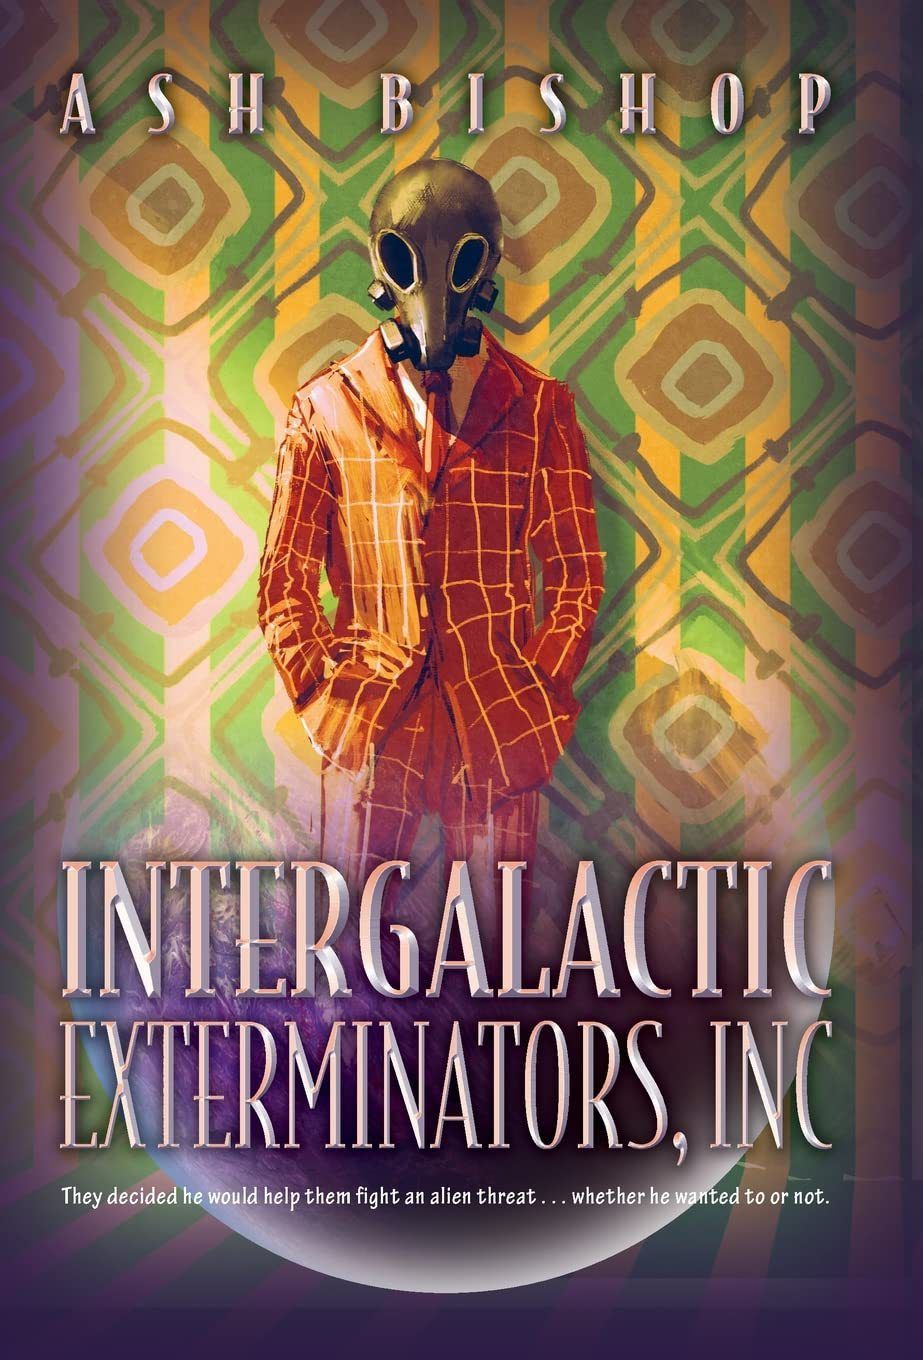 The book cover for Intergalactic Exterminators by Ash Bishop